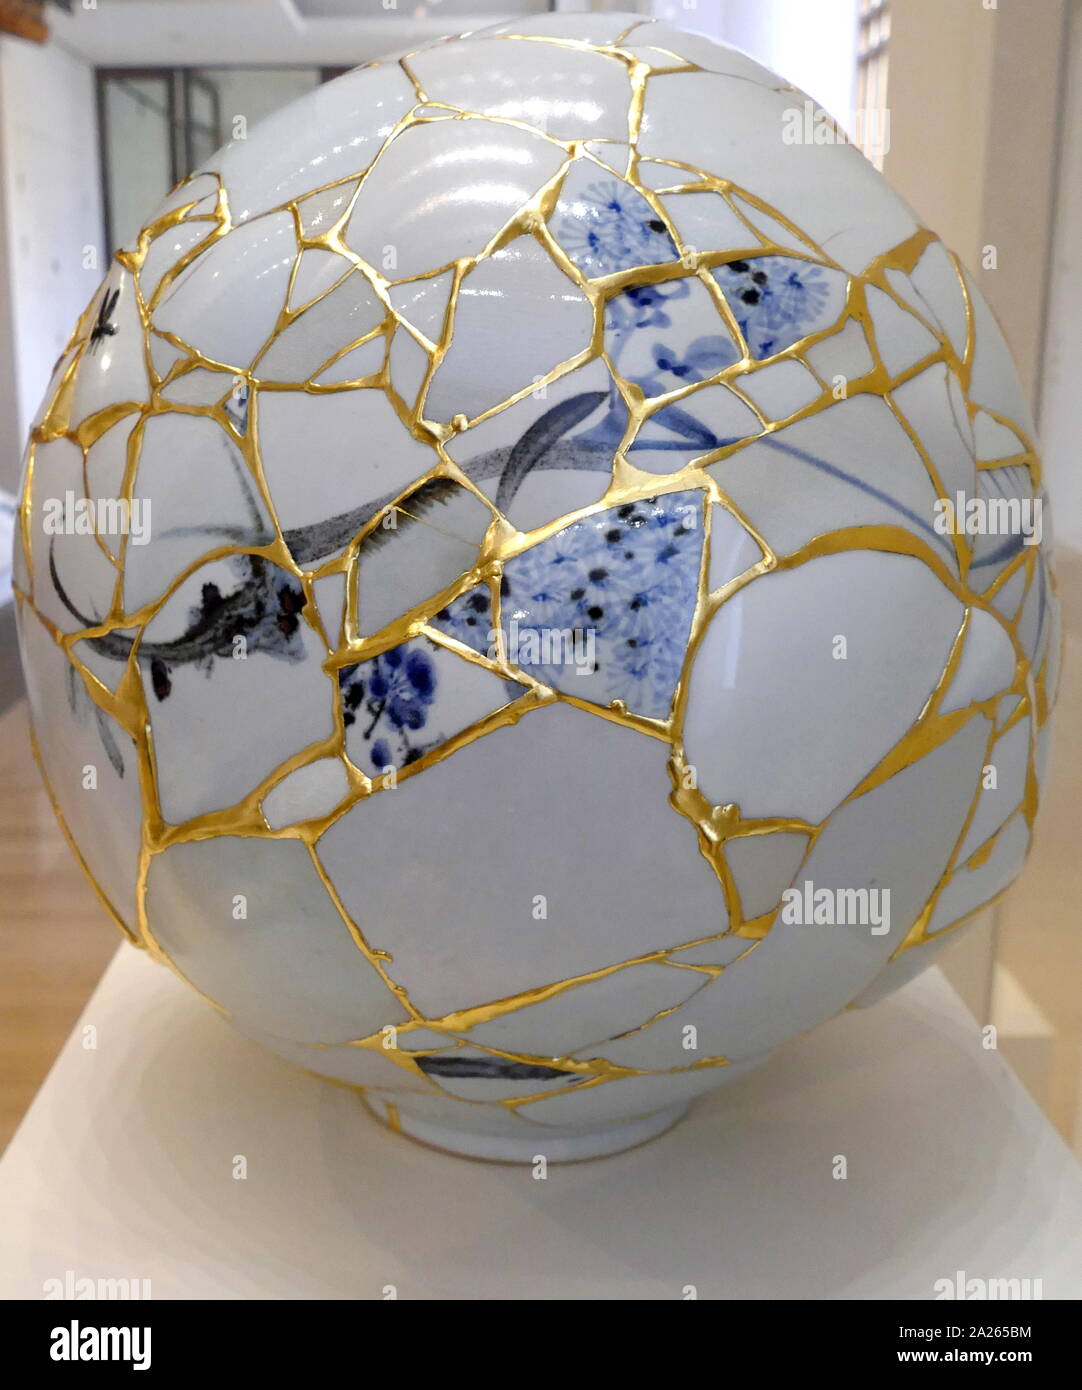 Translated Vase by Yeesookyung (b. 1963), Republic of South Korea, 2014. made from porcelain fragments, epoxy, lacquer, and gold leaf. The “Translated Vase” series was first exhibited in 2001. The artist translates (recycles), rejected objects to make new, whole works. Stock Photo